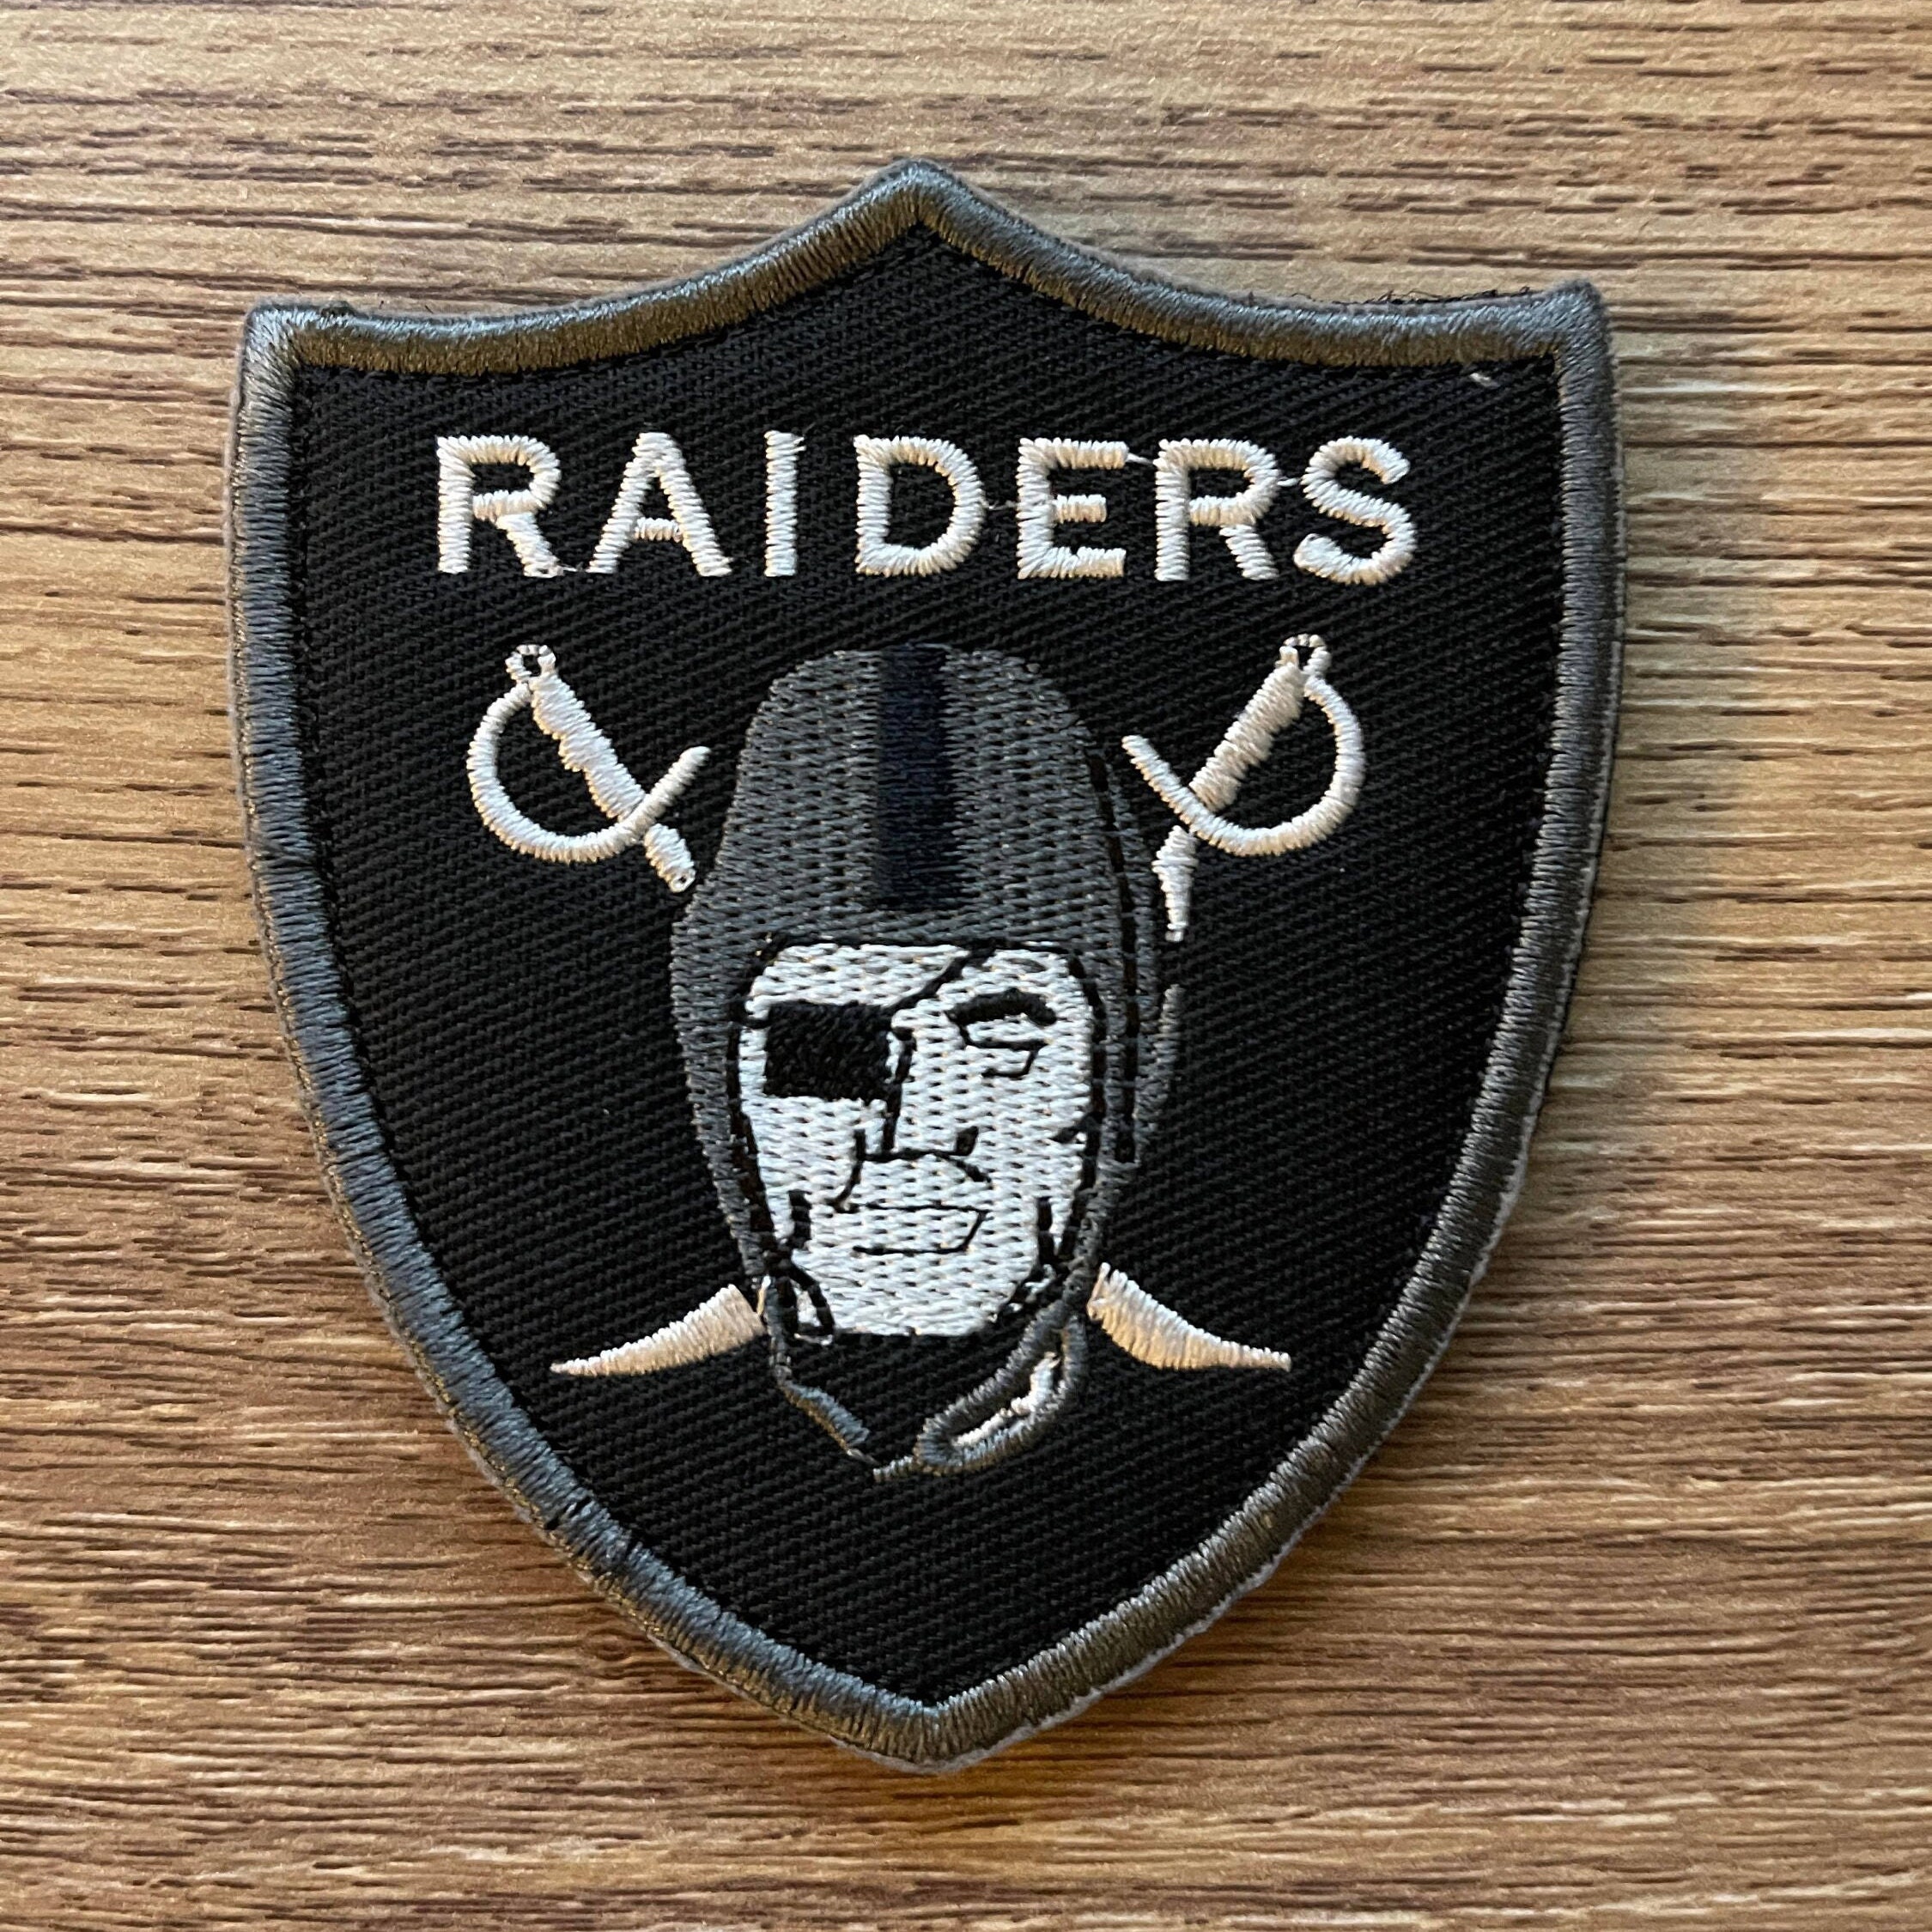 Raiders Patch Hook and Loop Tactical Morale Applique Fastener Military  Embroidered Patch 2Pcs (Color 1)